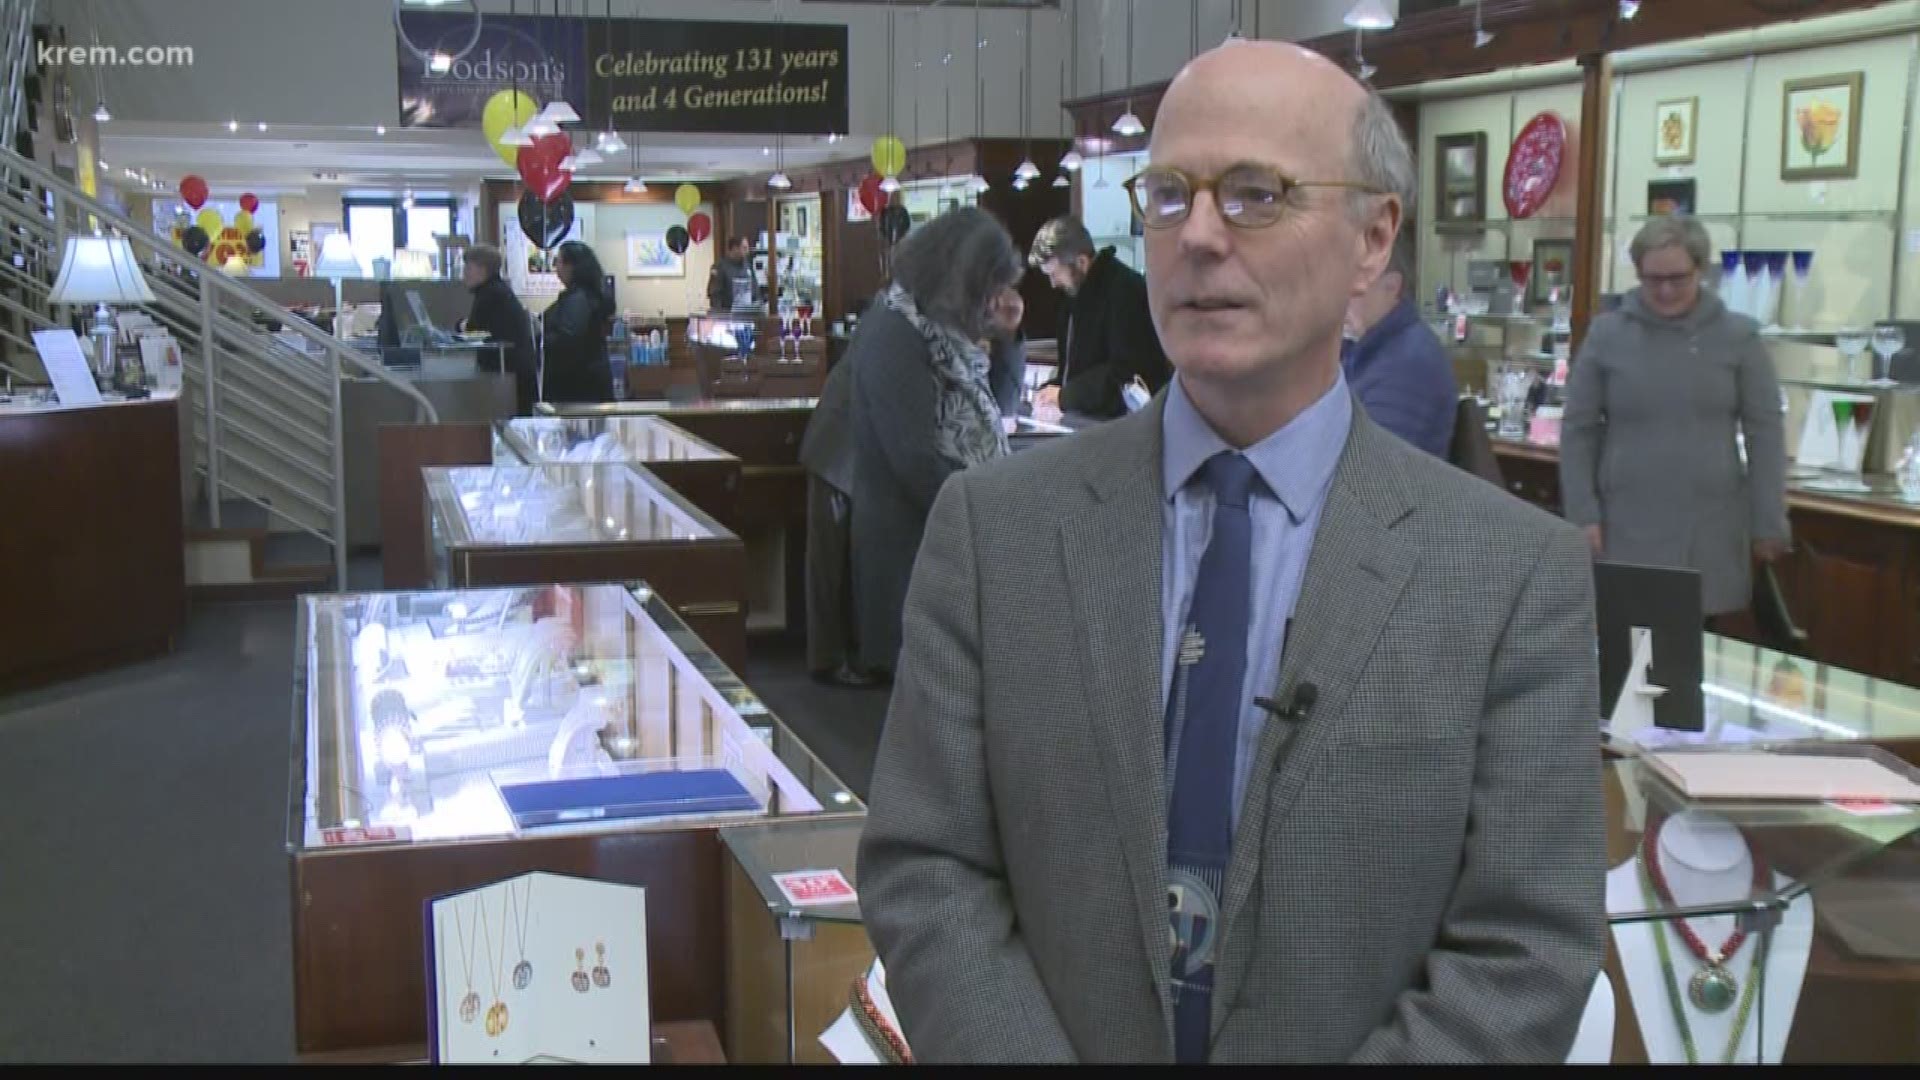 Dodson's jewelers closes after 131 years